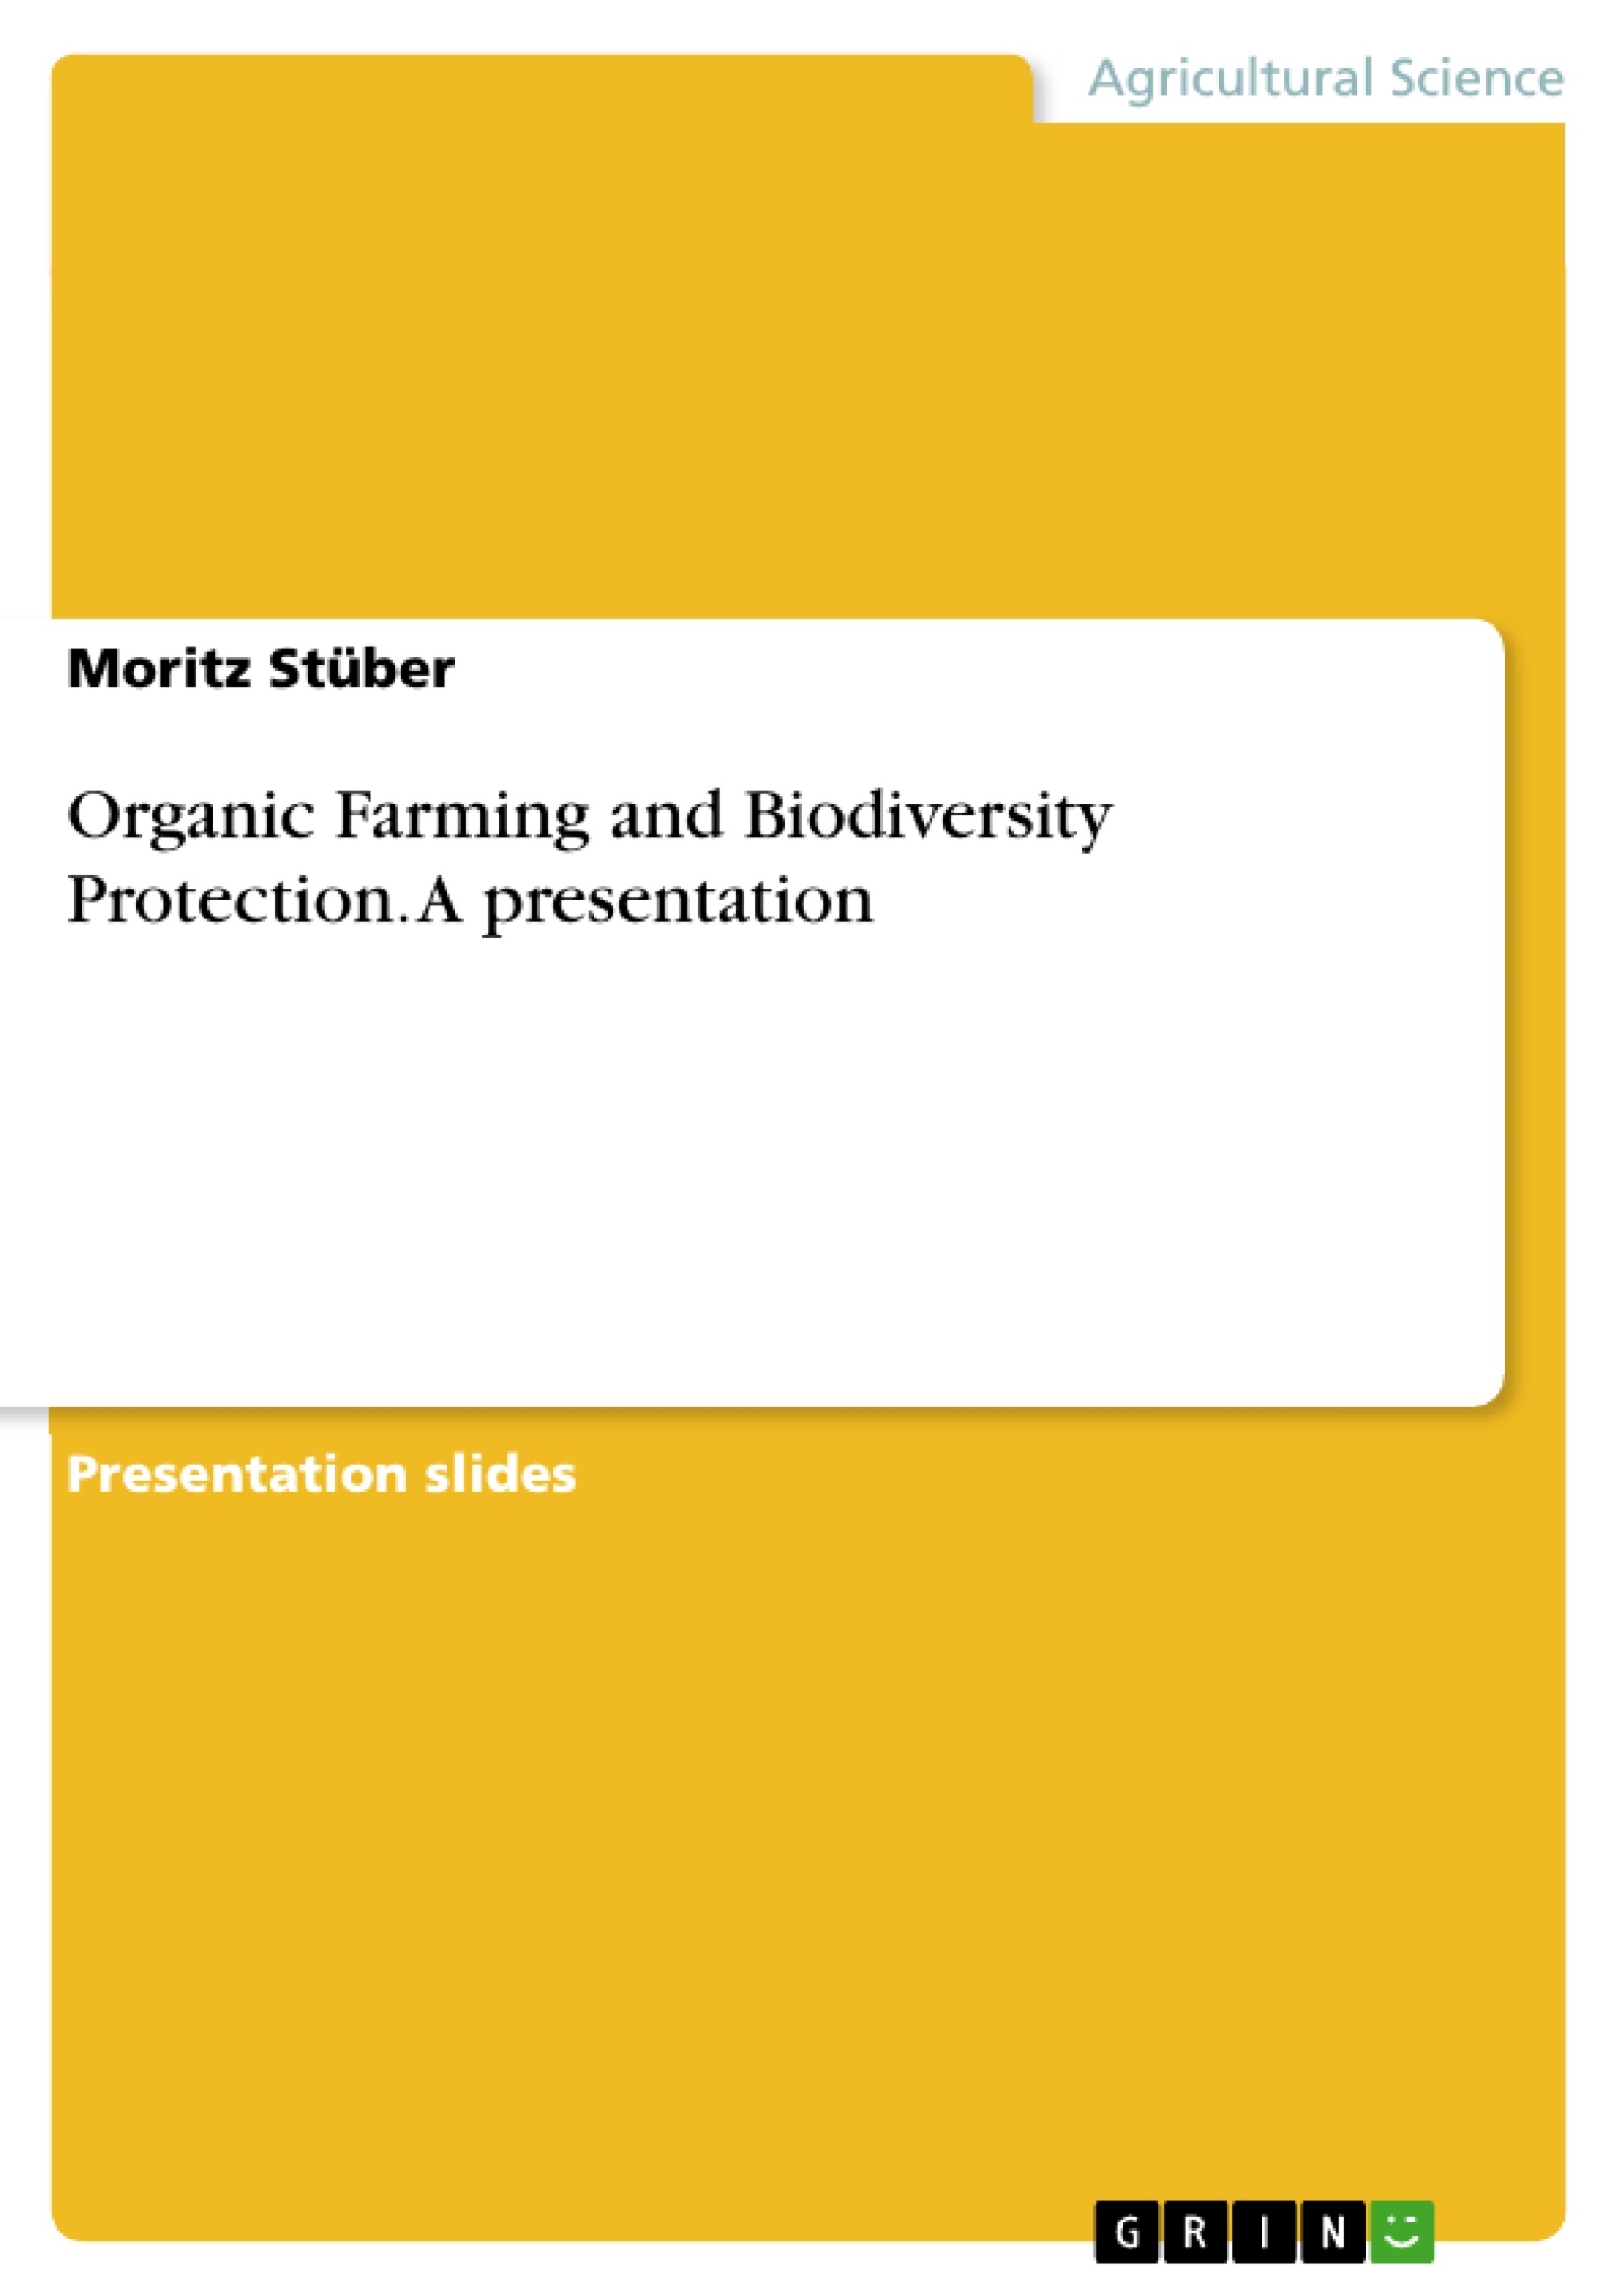 Title: Organic Farming and Biodiversity Protection. A presentation